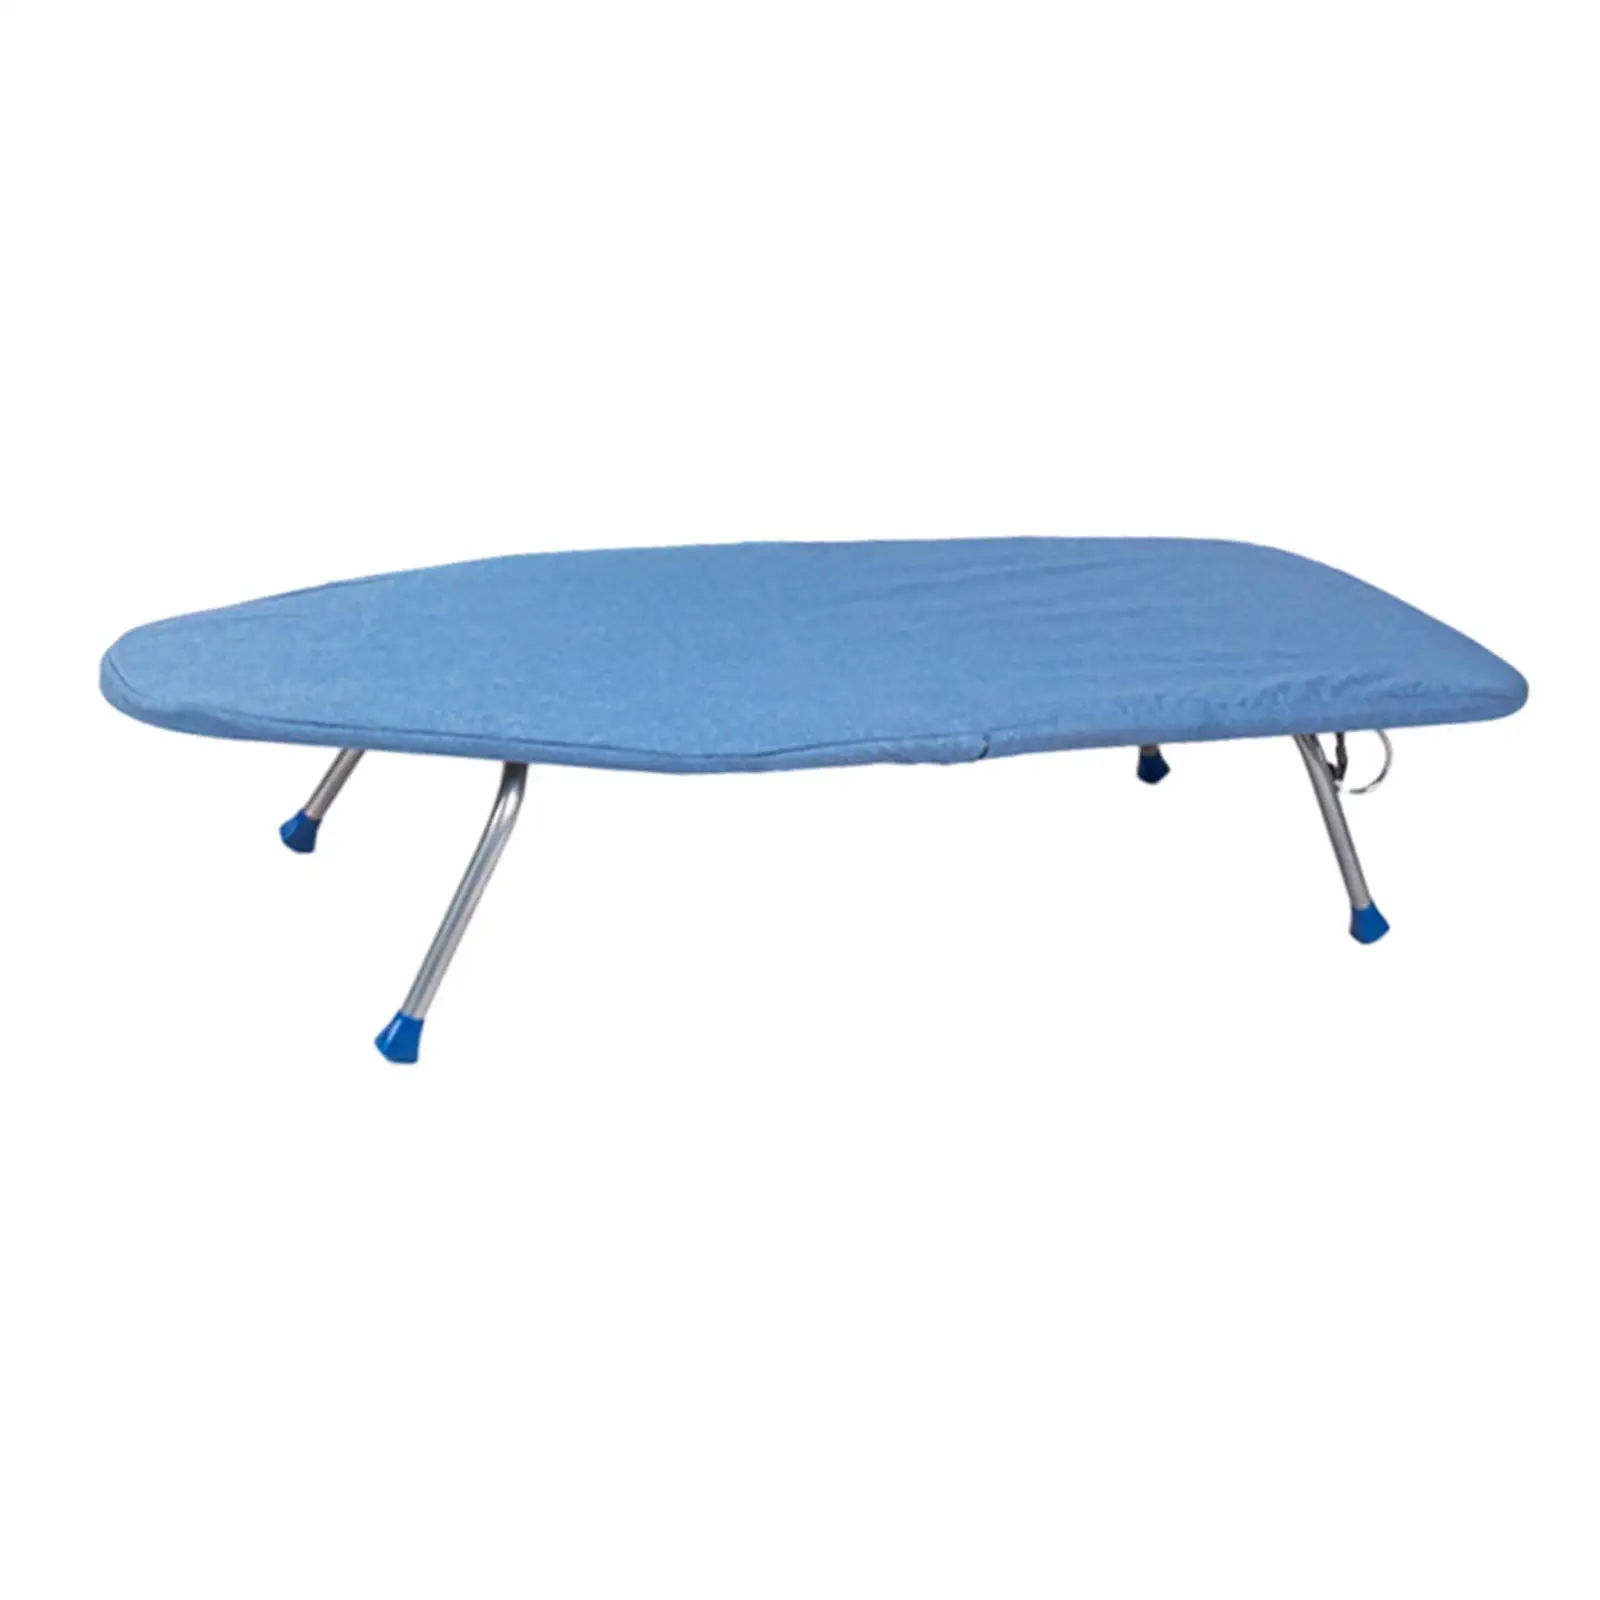 Tabletop Ironing Board Countertop Ironing Board Heat Resistant Cover Small Iron Board for Home Sewing Dorm Travel Craft Room